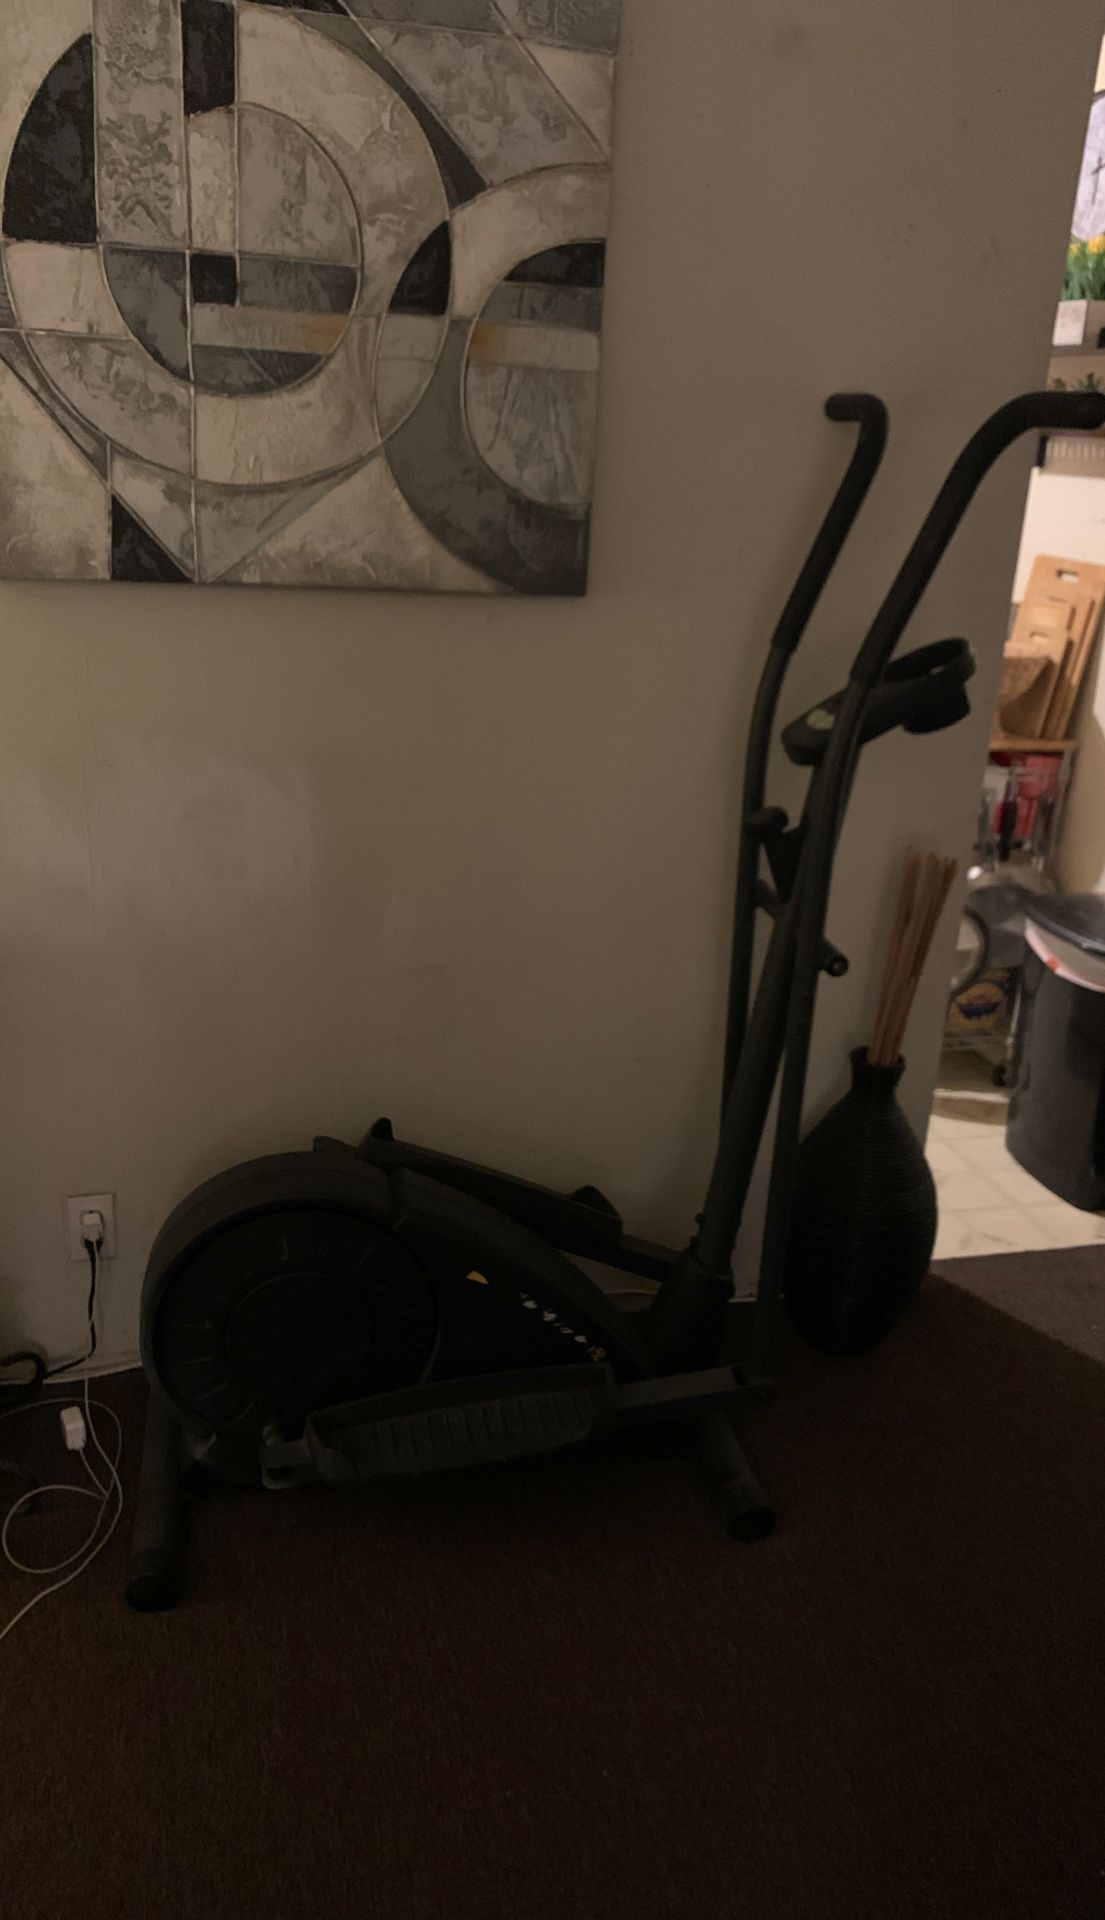 Elliptical in good condition. Everything works! $120